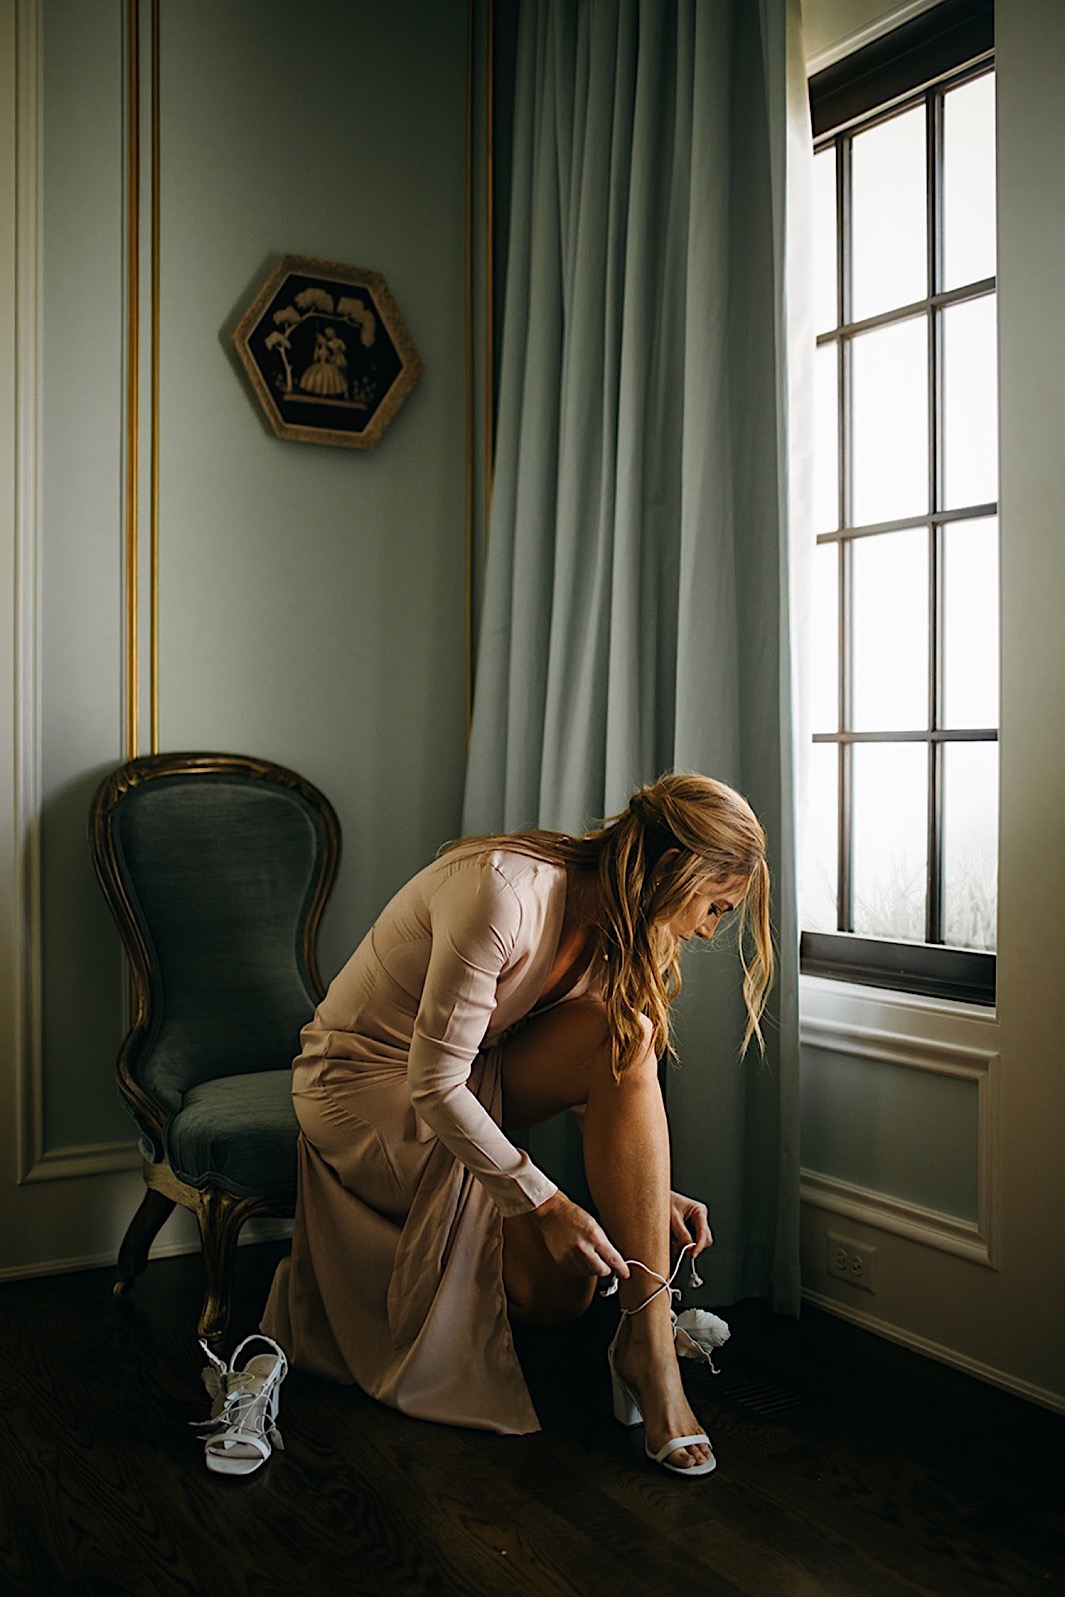 A bride sits on a vintage chair next to a window and fastens her shoes.